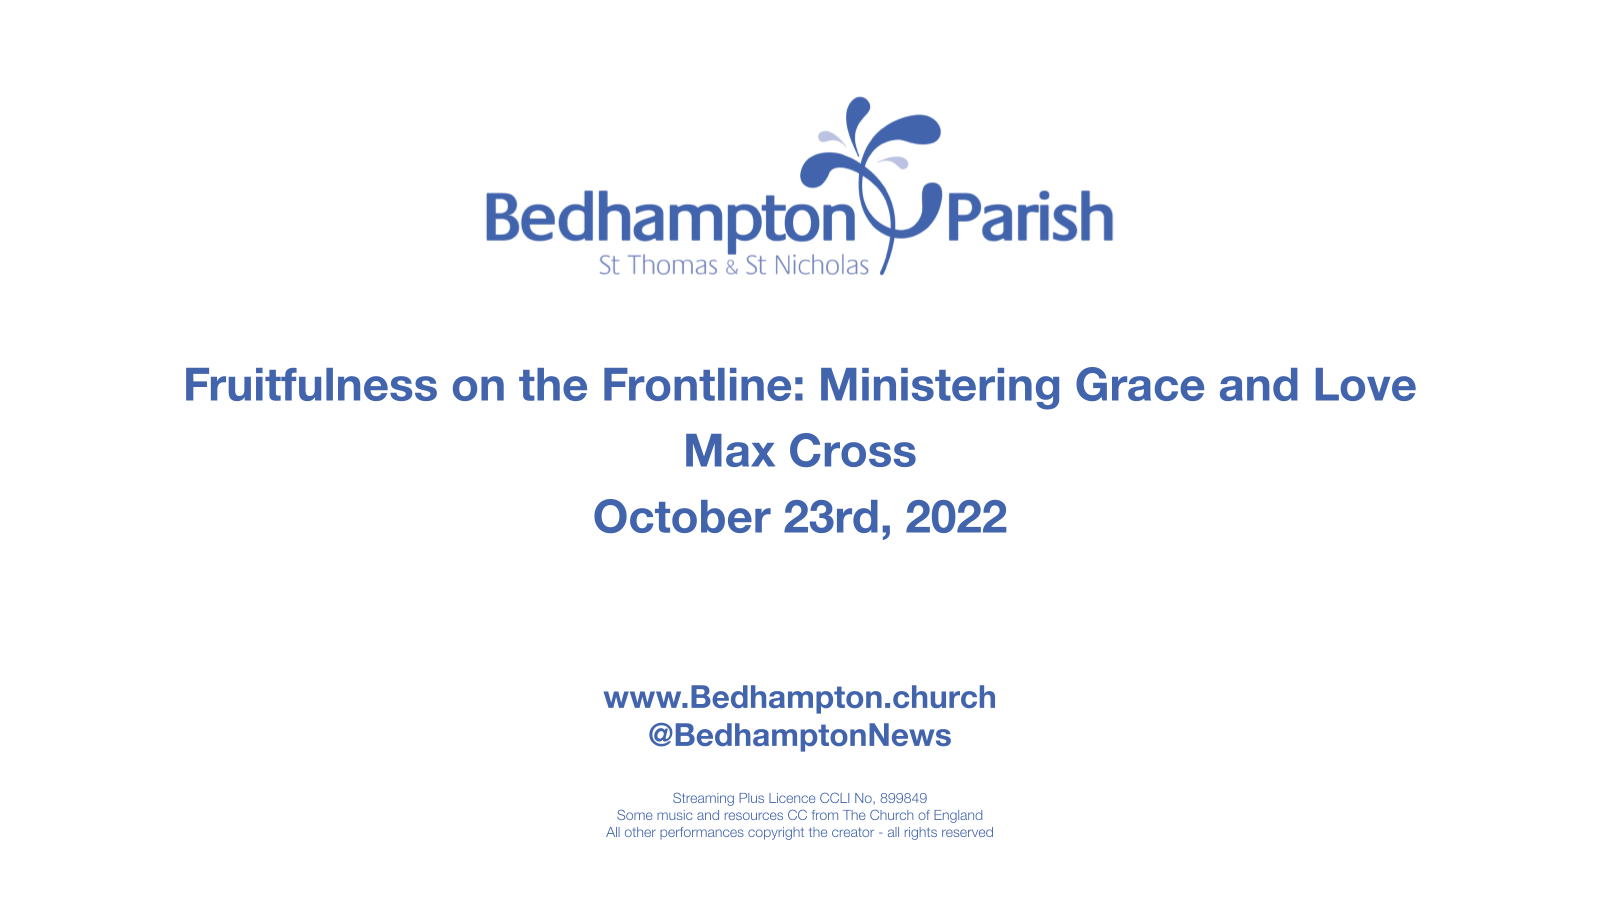 Sermon October 23rd, 2022 – Fruitfulness on the Frontline: Ministering Grace and Love